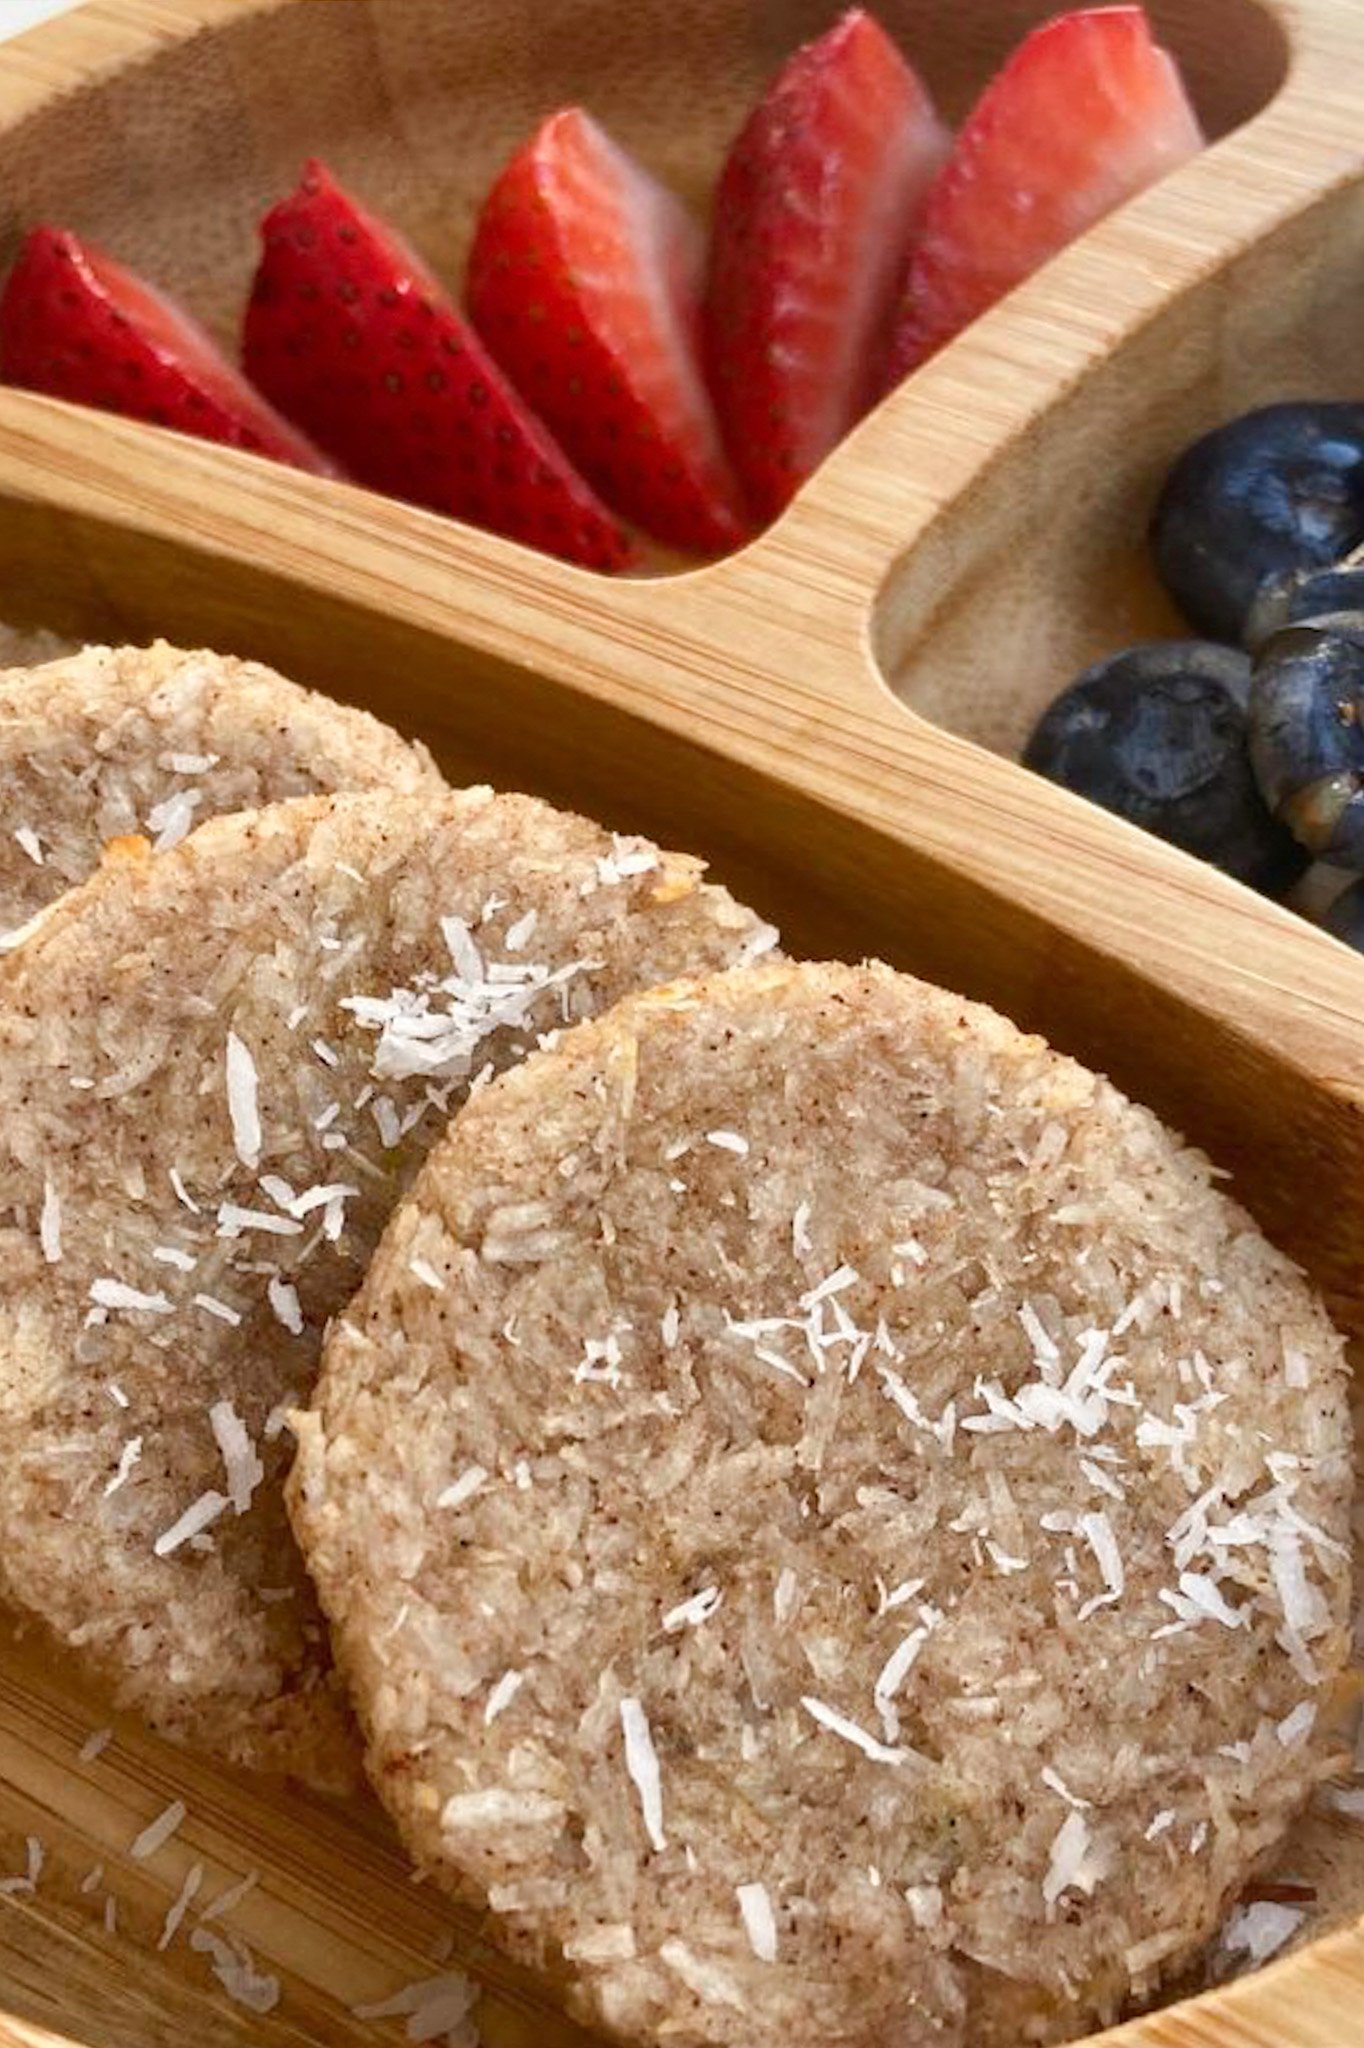 Coconut cookies served with strawberries and blueberries